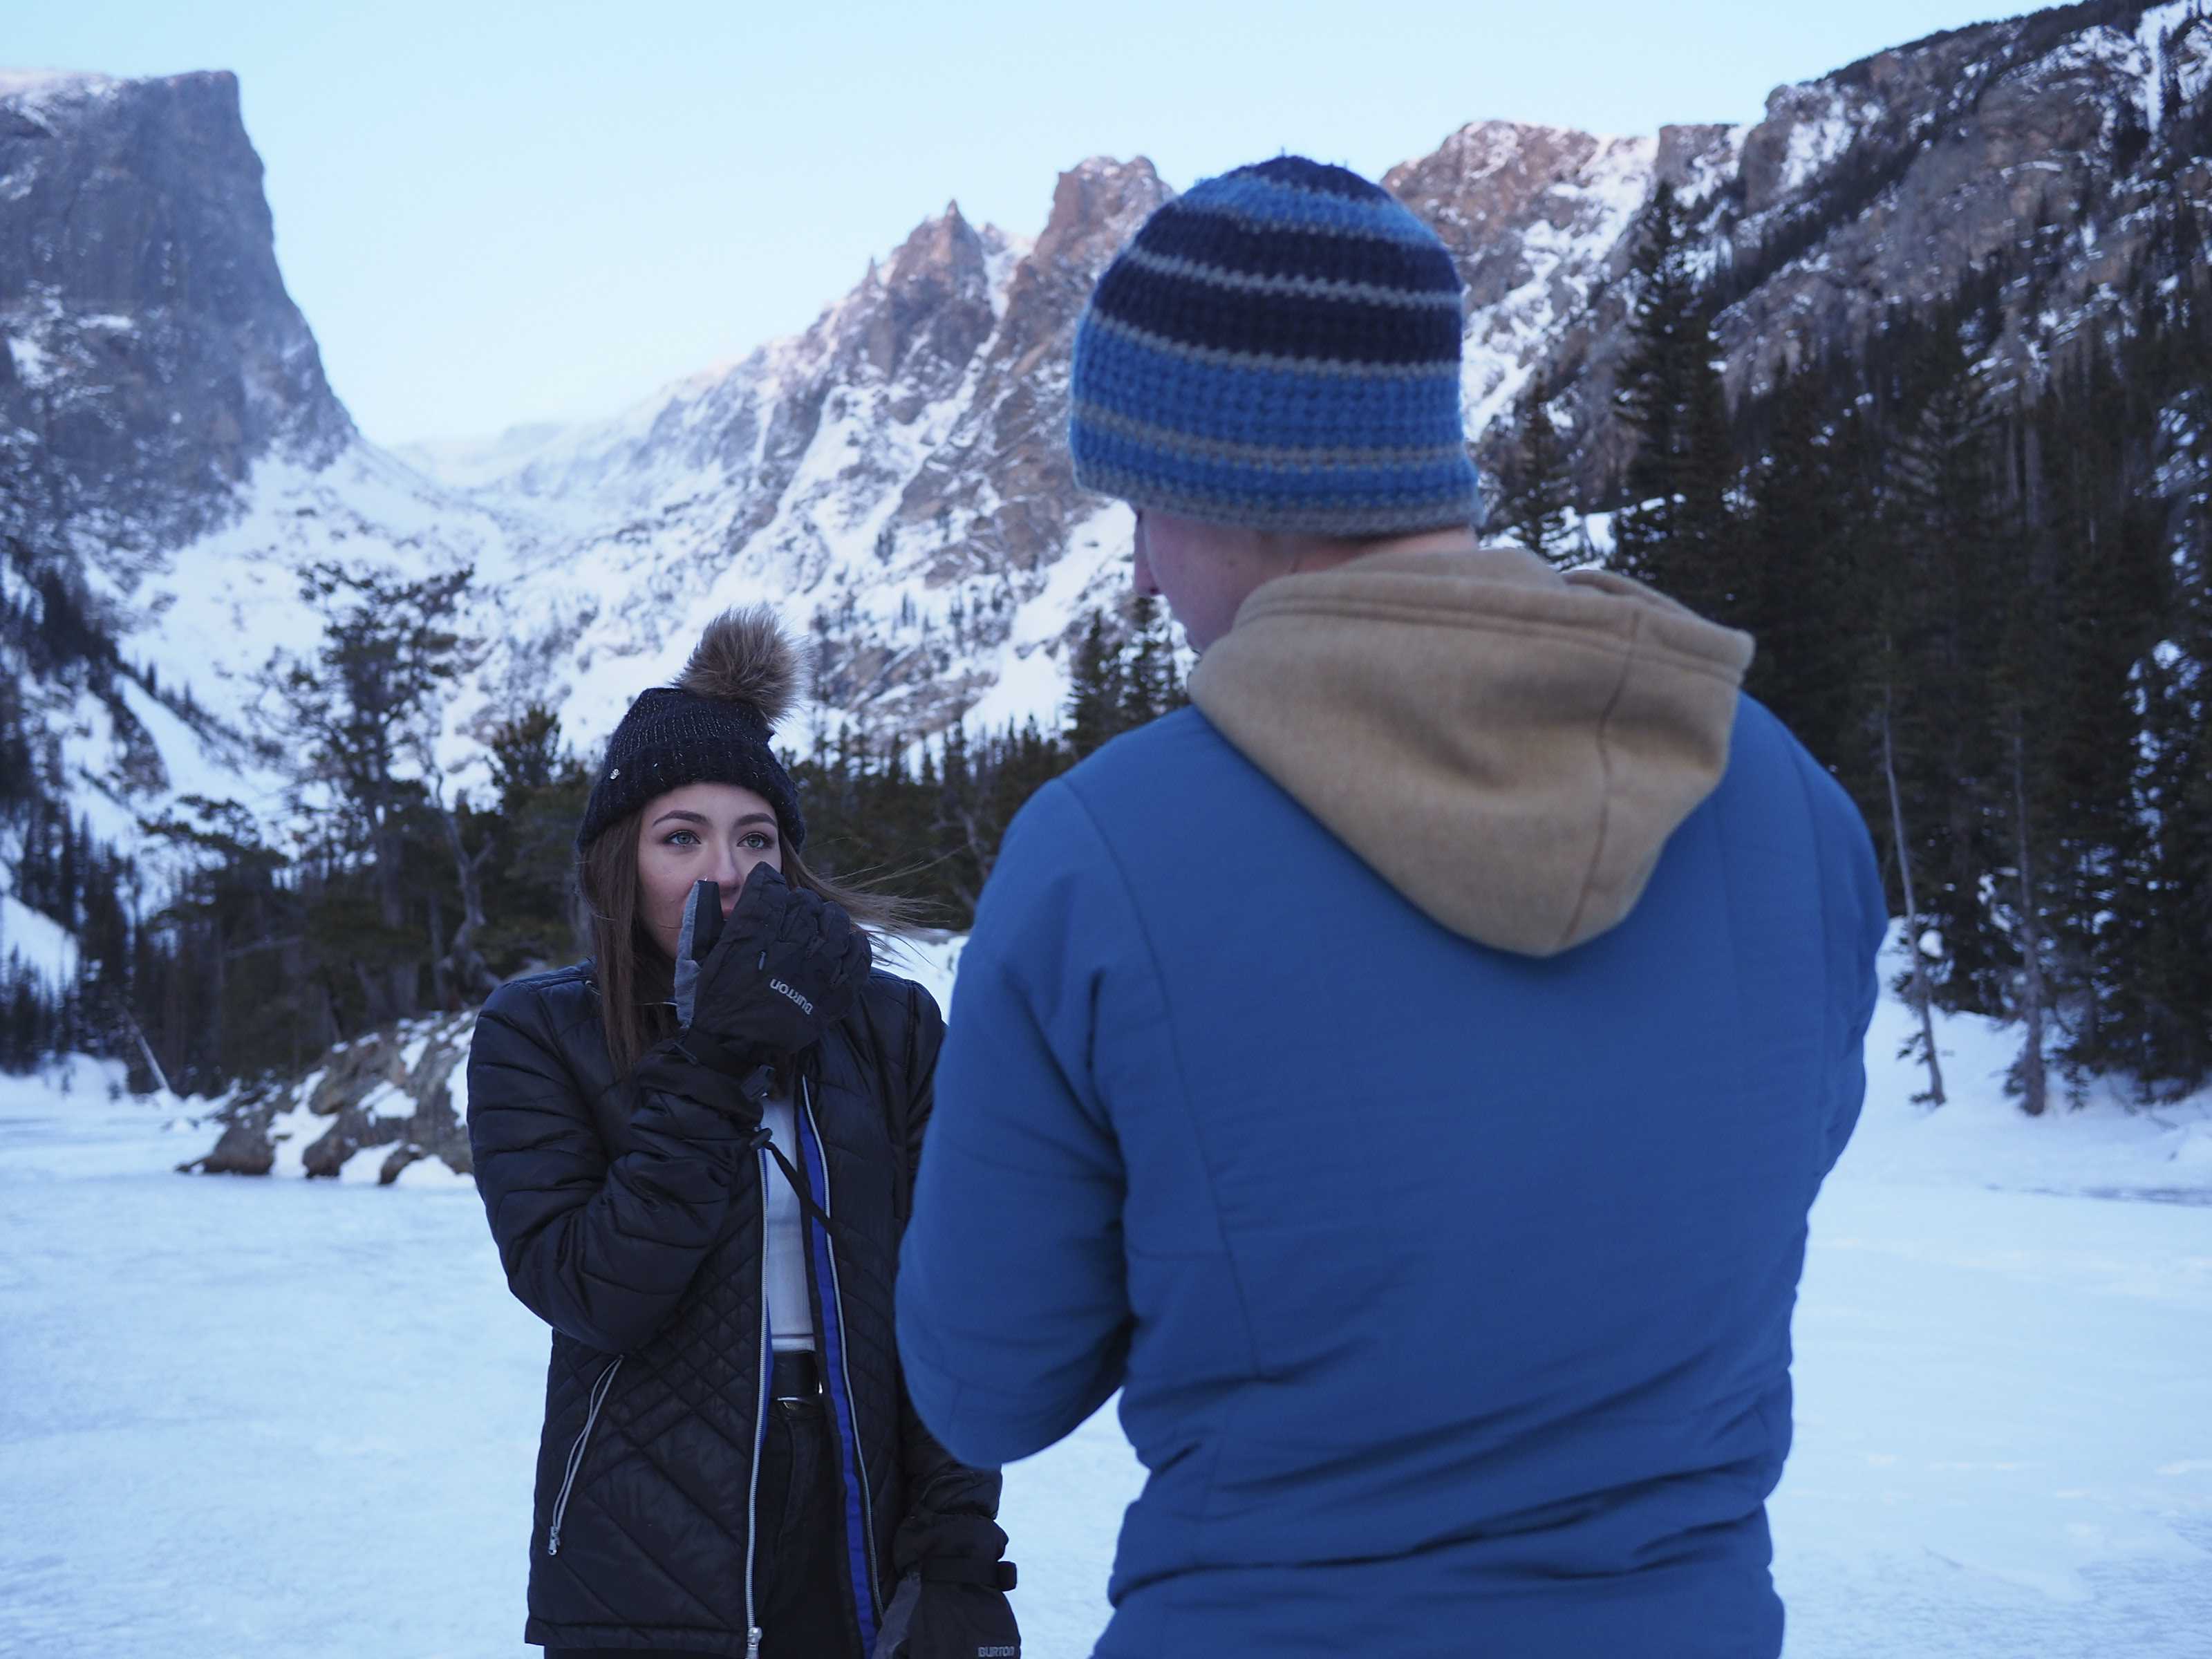 Man takes picture of woman in front of mountain